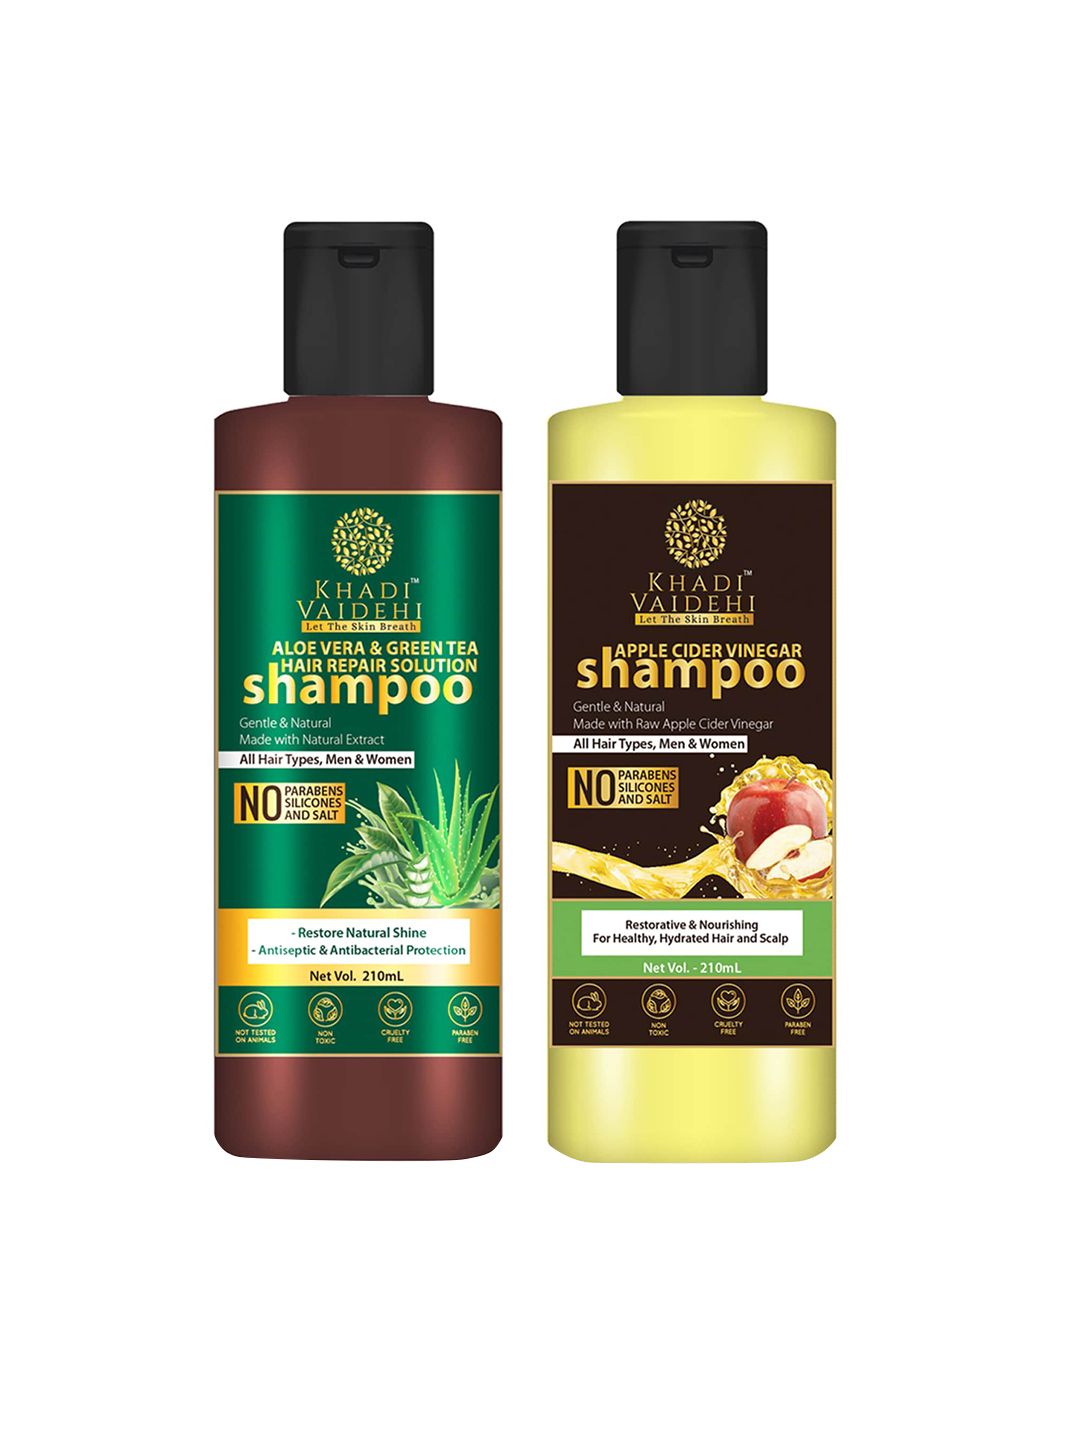 Khadi Vaidehi Adults Set of 2 Paraben-Free Shampoos for All Hair Types - 210ml each Price in India